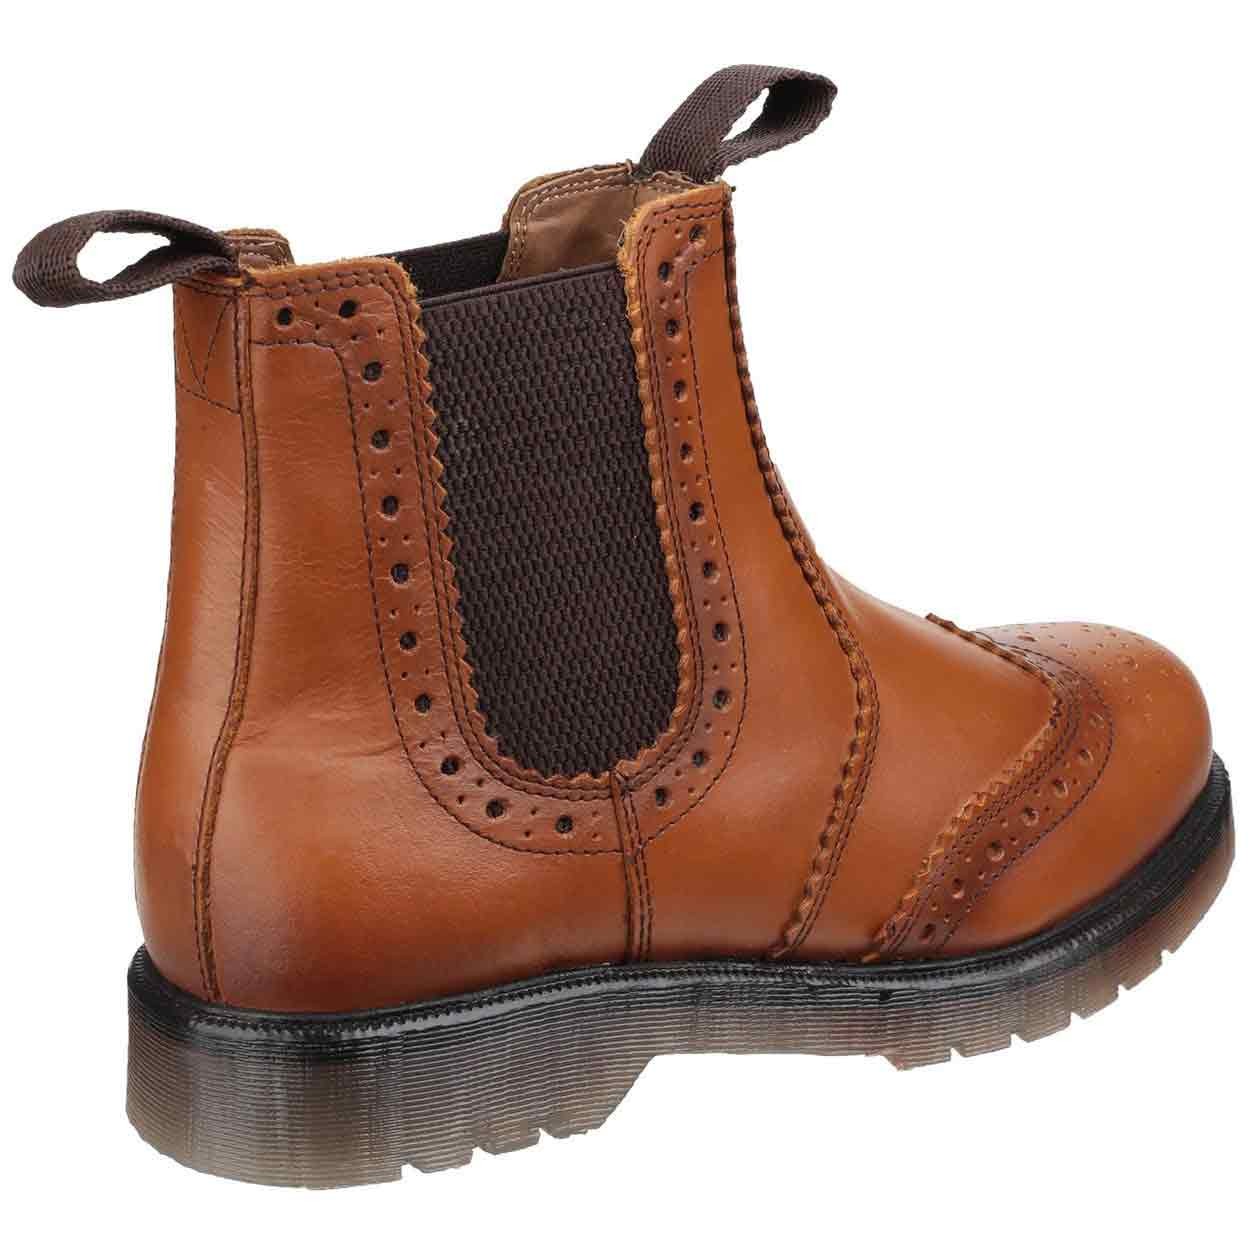 Amblers Dalby Brogue Dealer Boot - Non-Safety Work Boots & Shoes - Safety  Footwear - Best Workwear